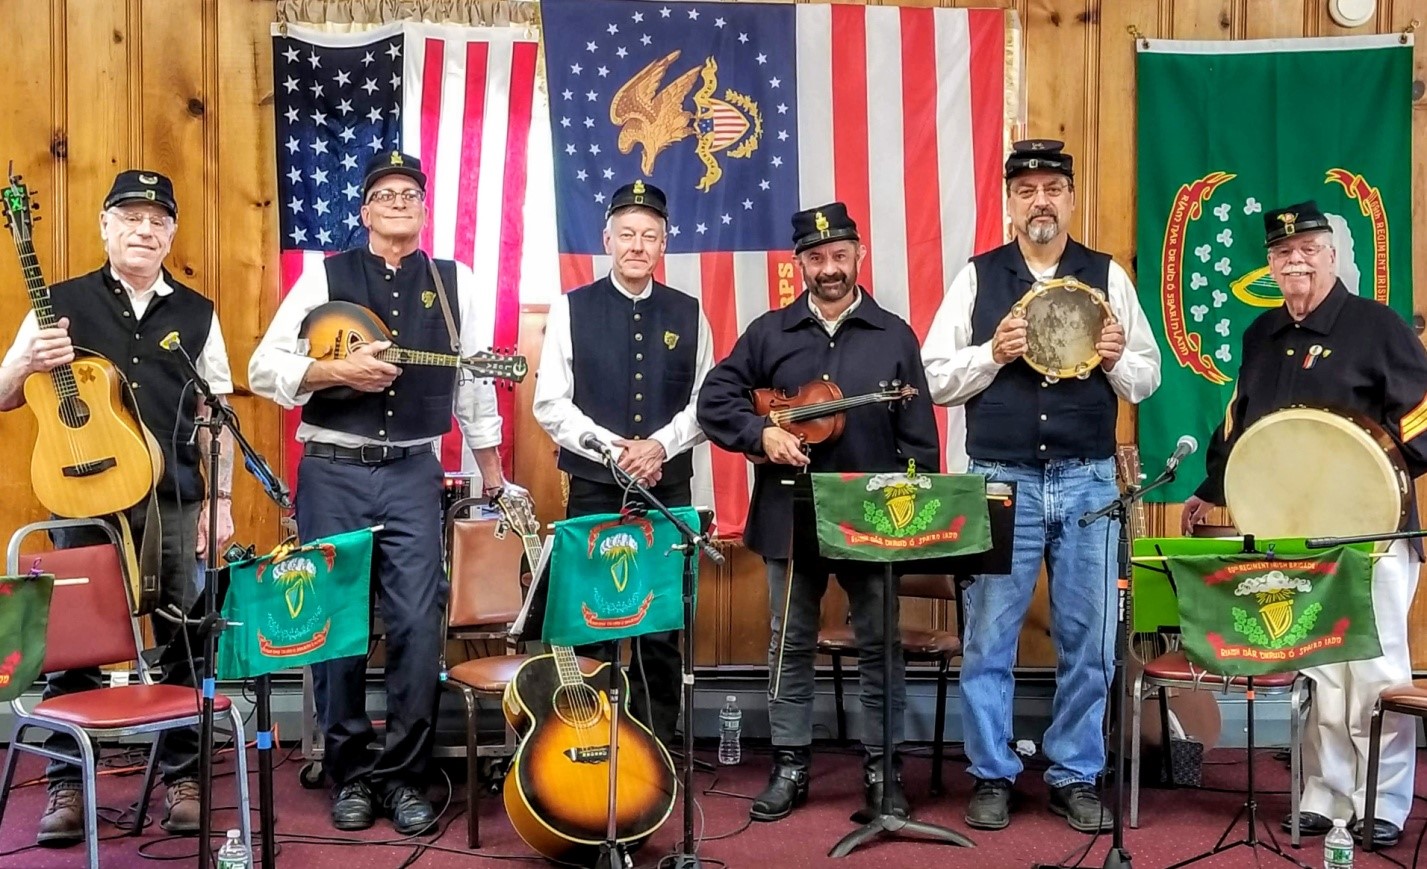 County Clerk » Songs of The Irish Brigade Presented by Veterans in a New Field and the Ulster County Civil War Roundtable